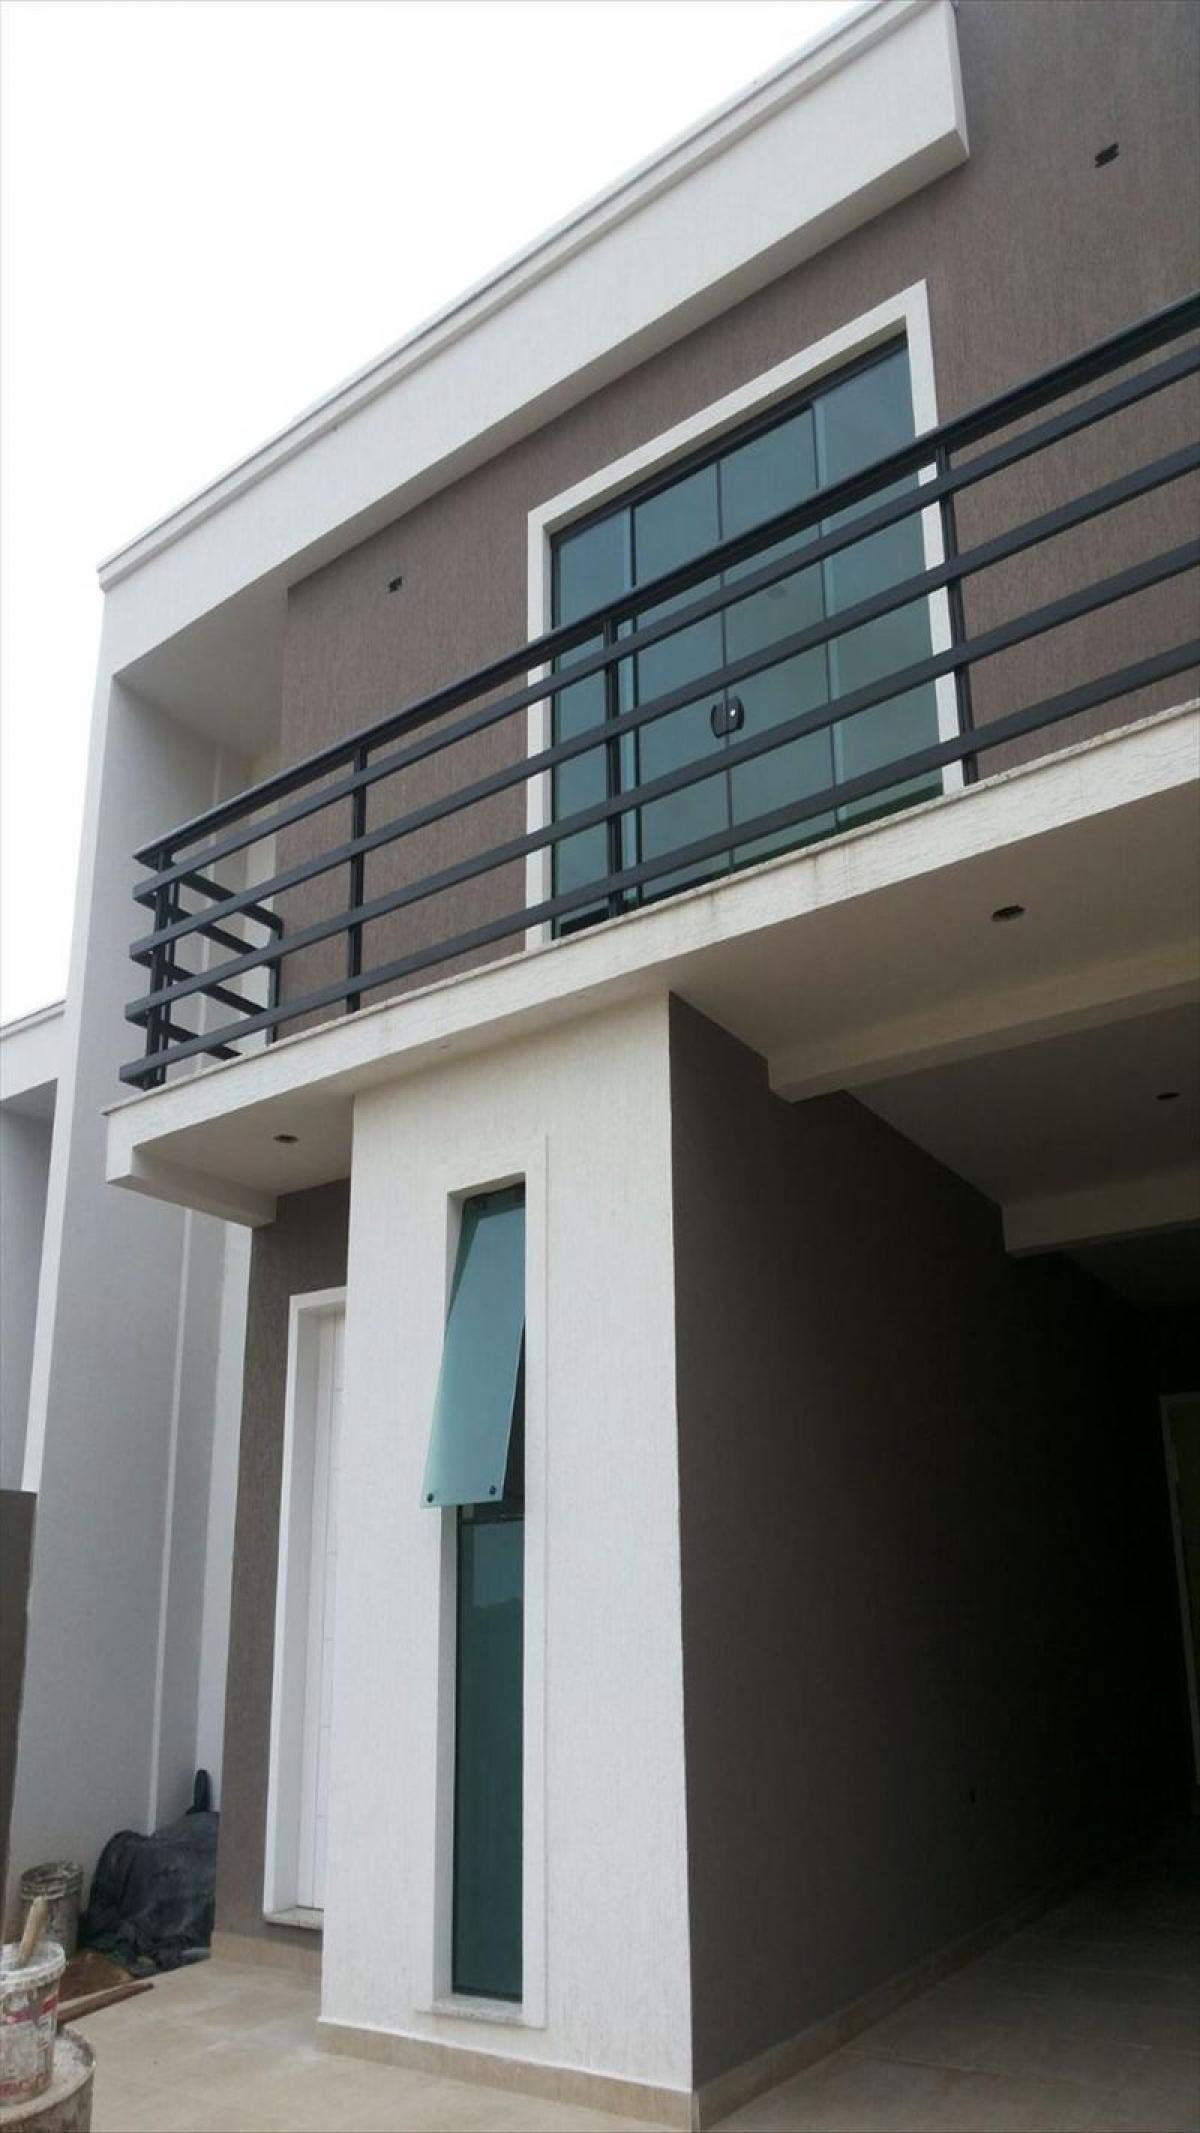 Picture of Townhome For Sale in Curitiba, Parana, Brazil